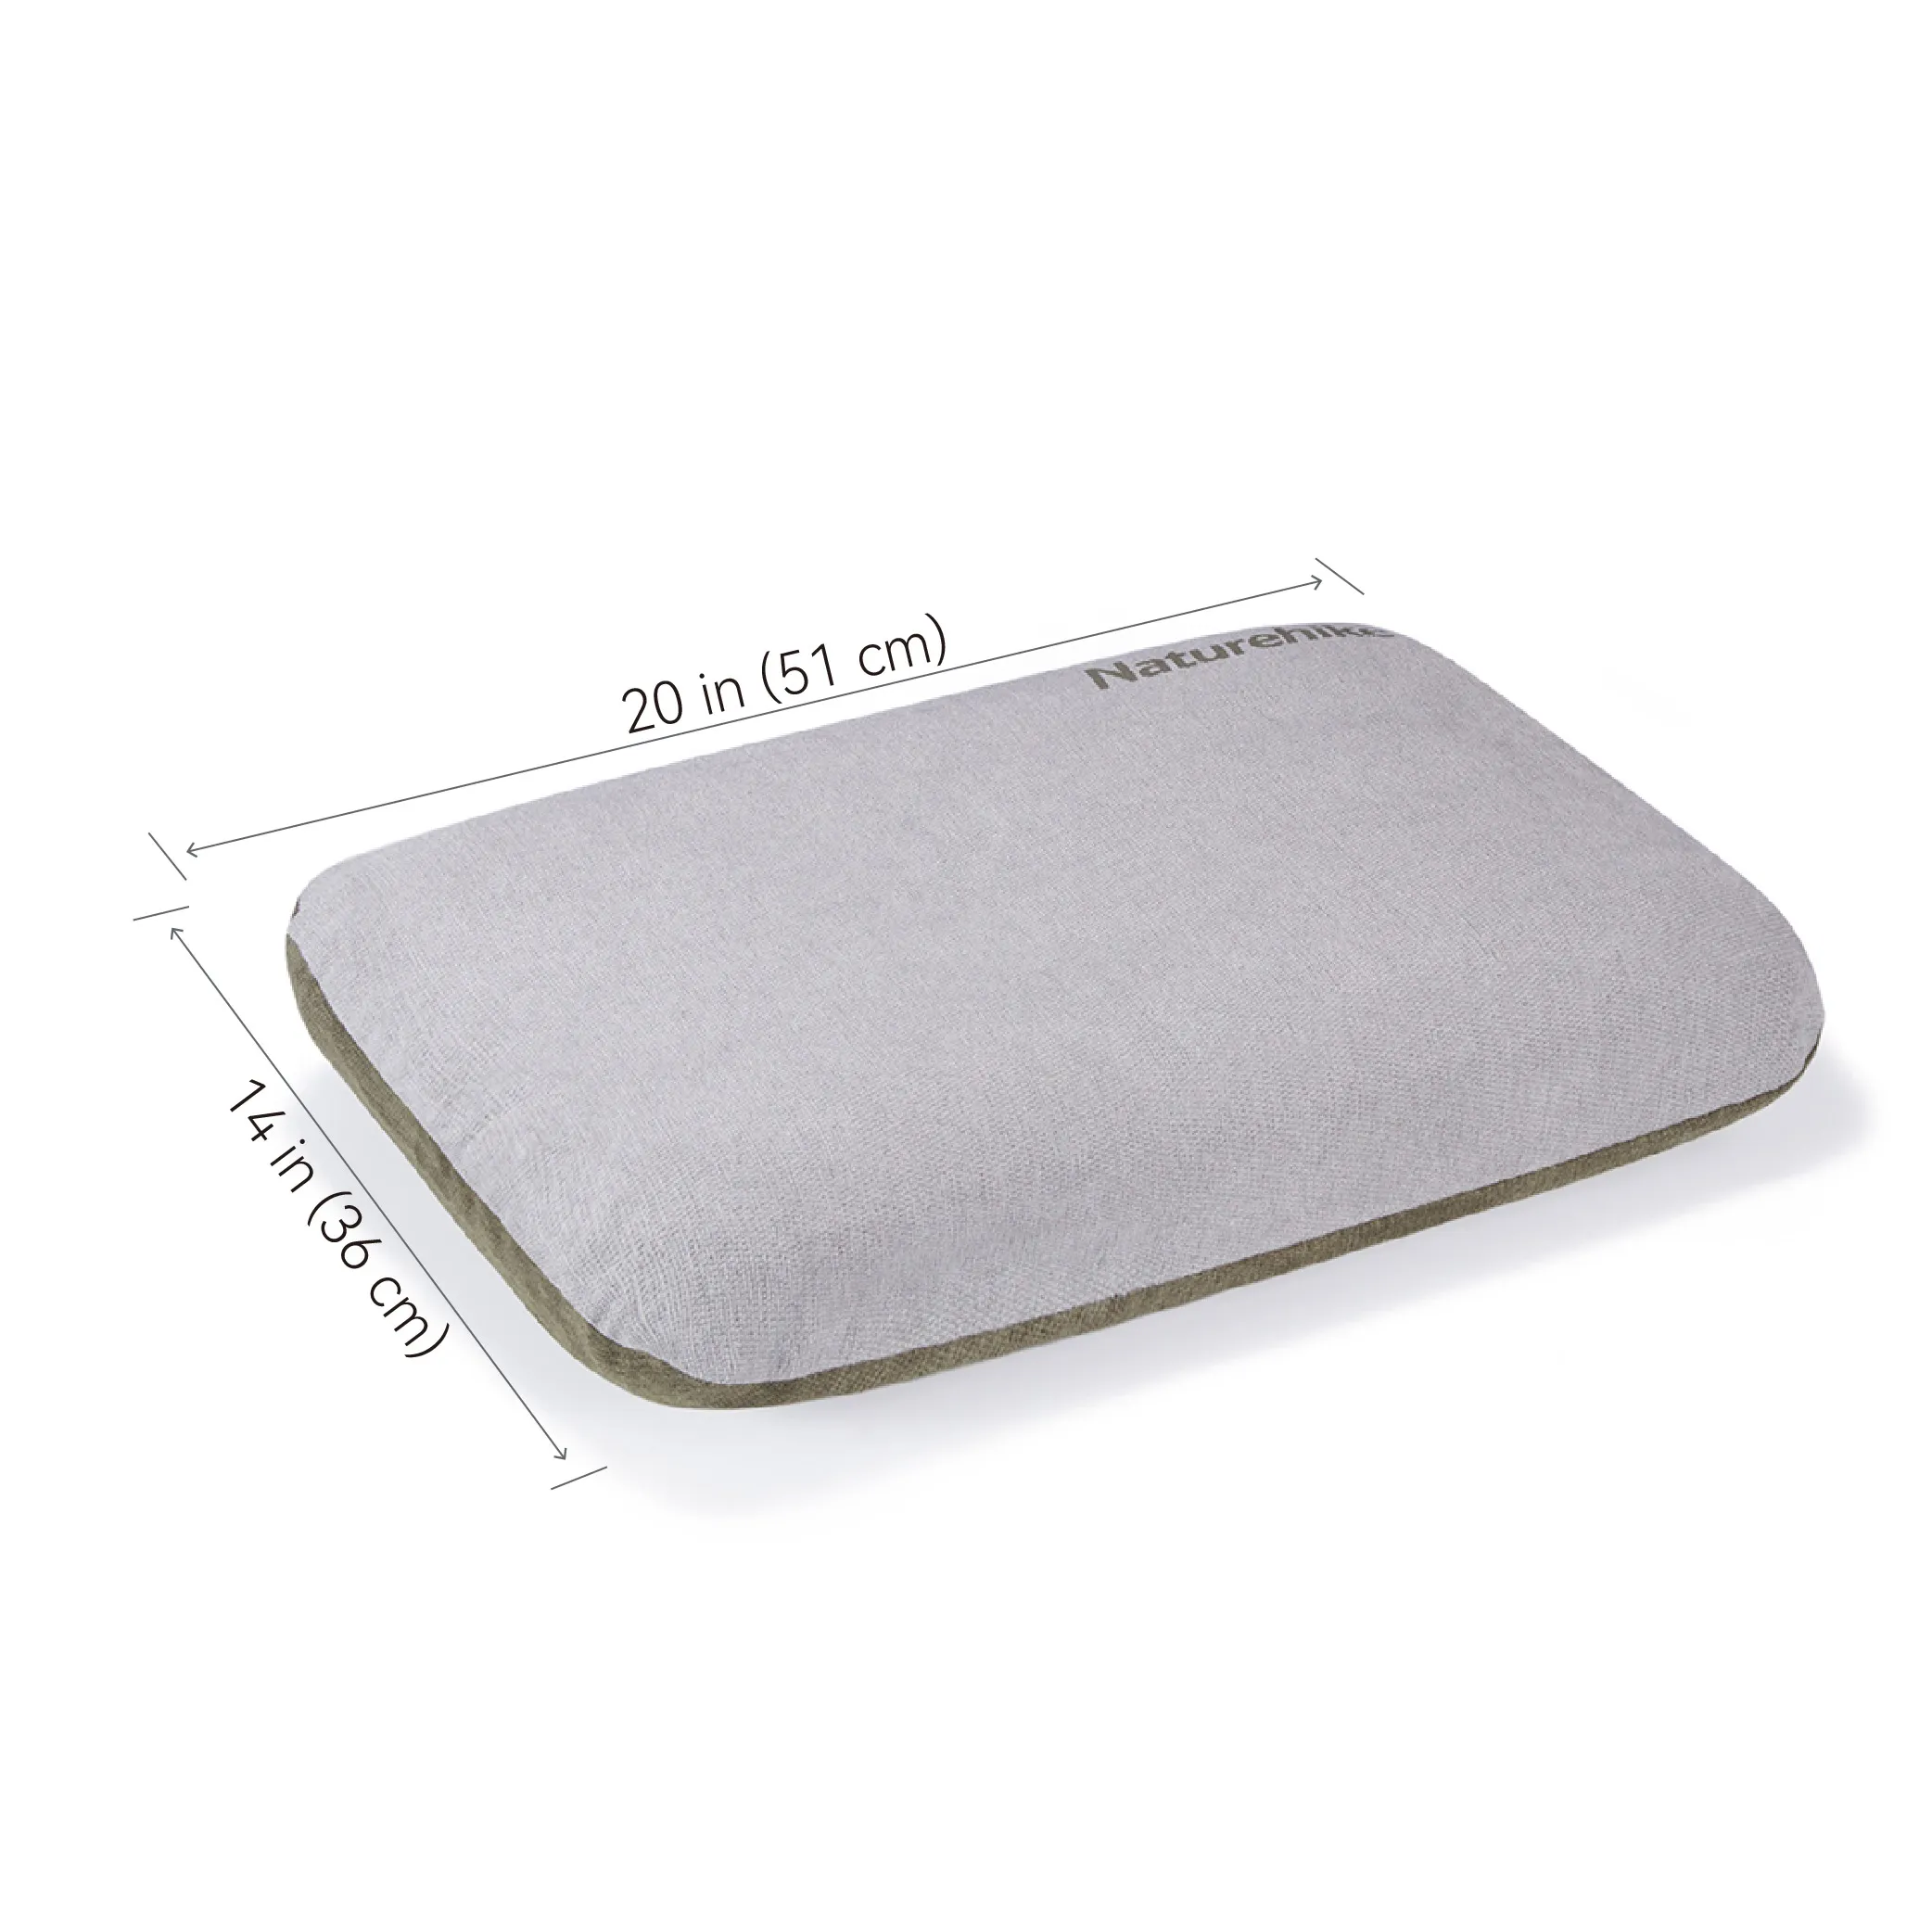 NATUREHIKE Pillowcase with Valve Eyelet (for Inflatable Camp Pillow) Grey 